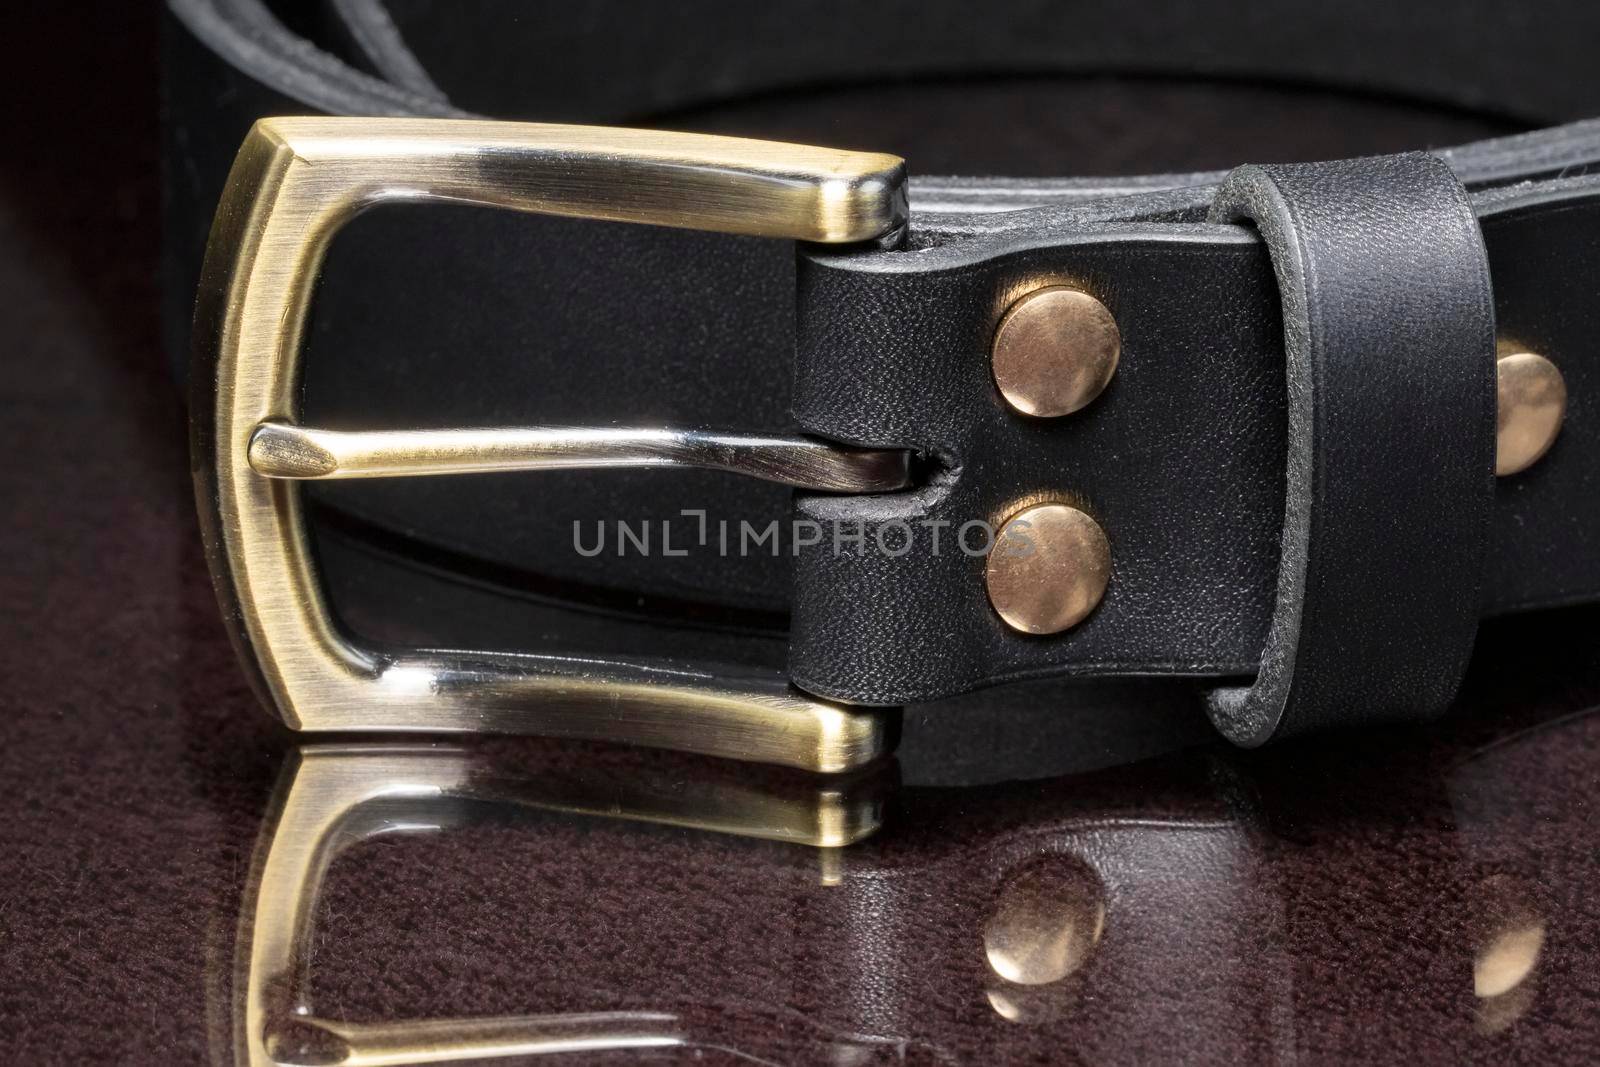 Leather belt with a golden buckle on a dark background close-up.